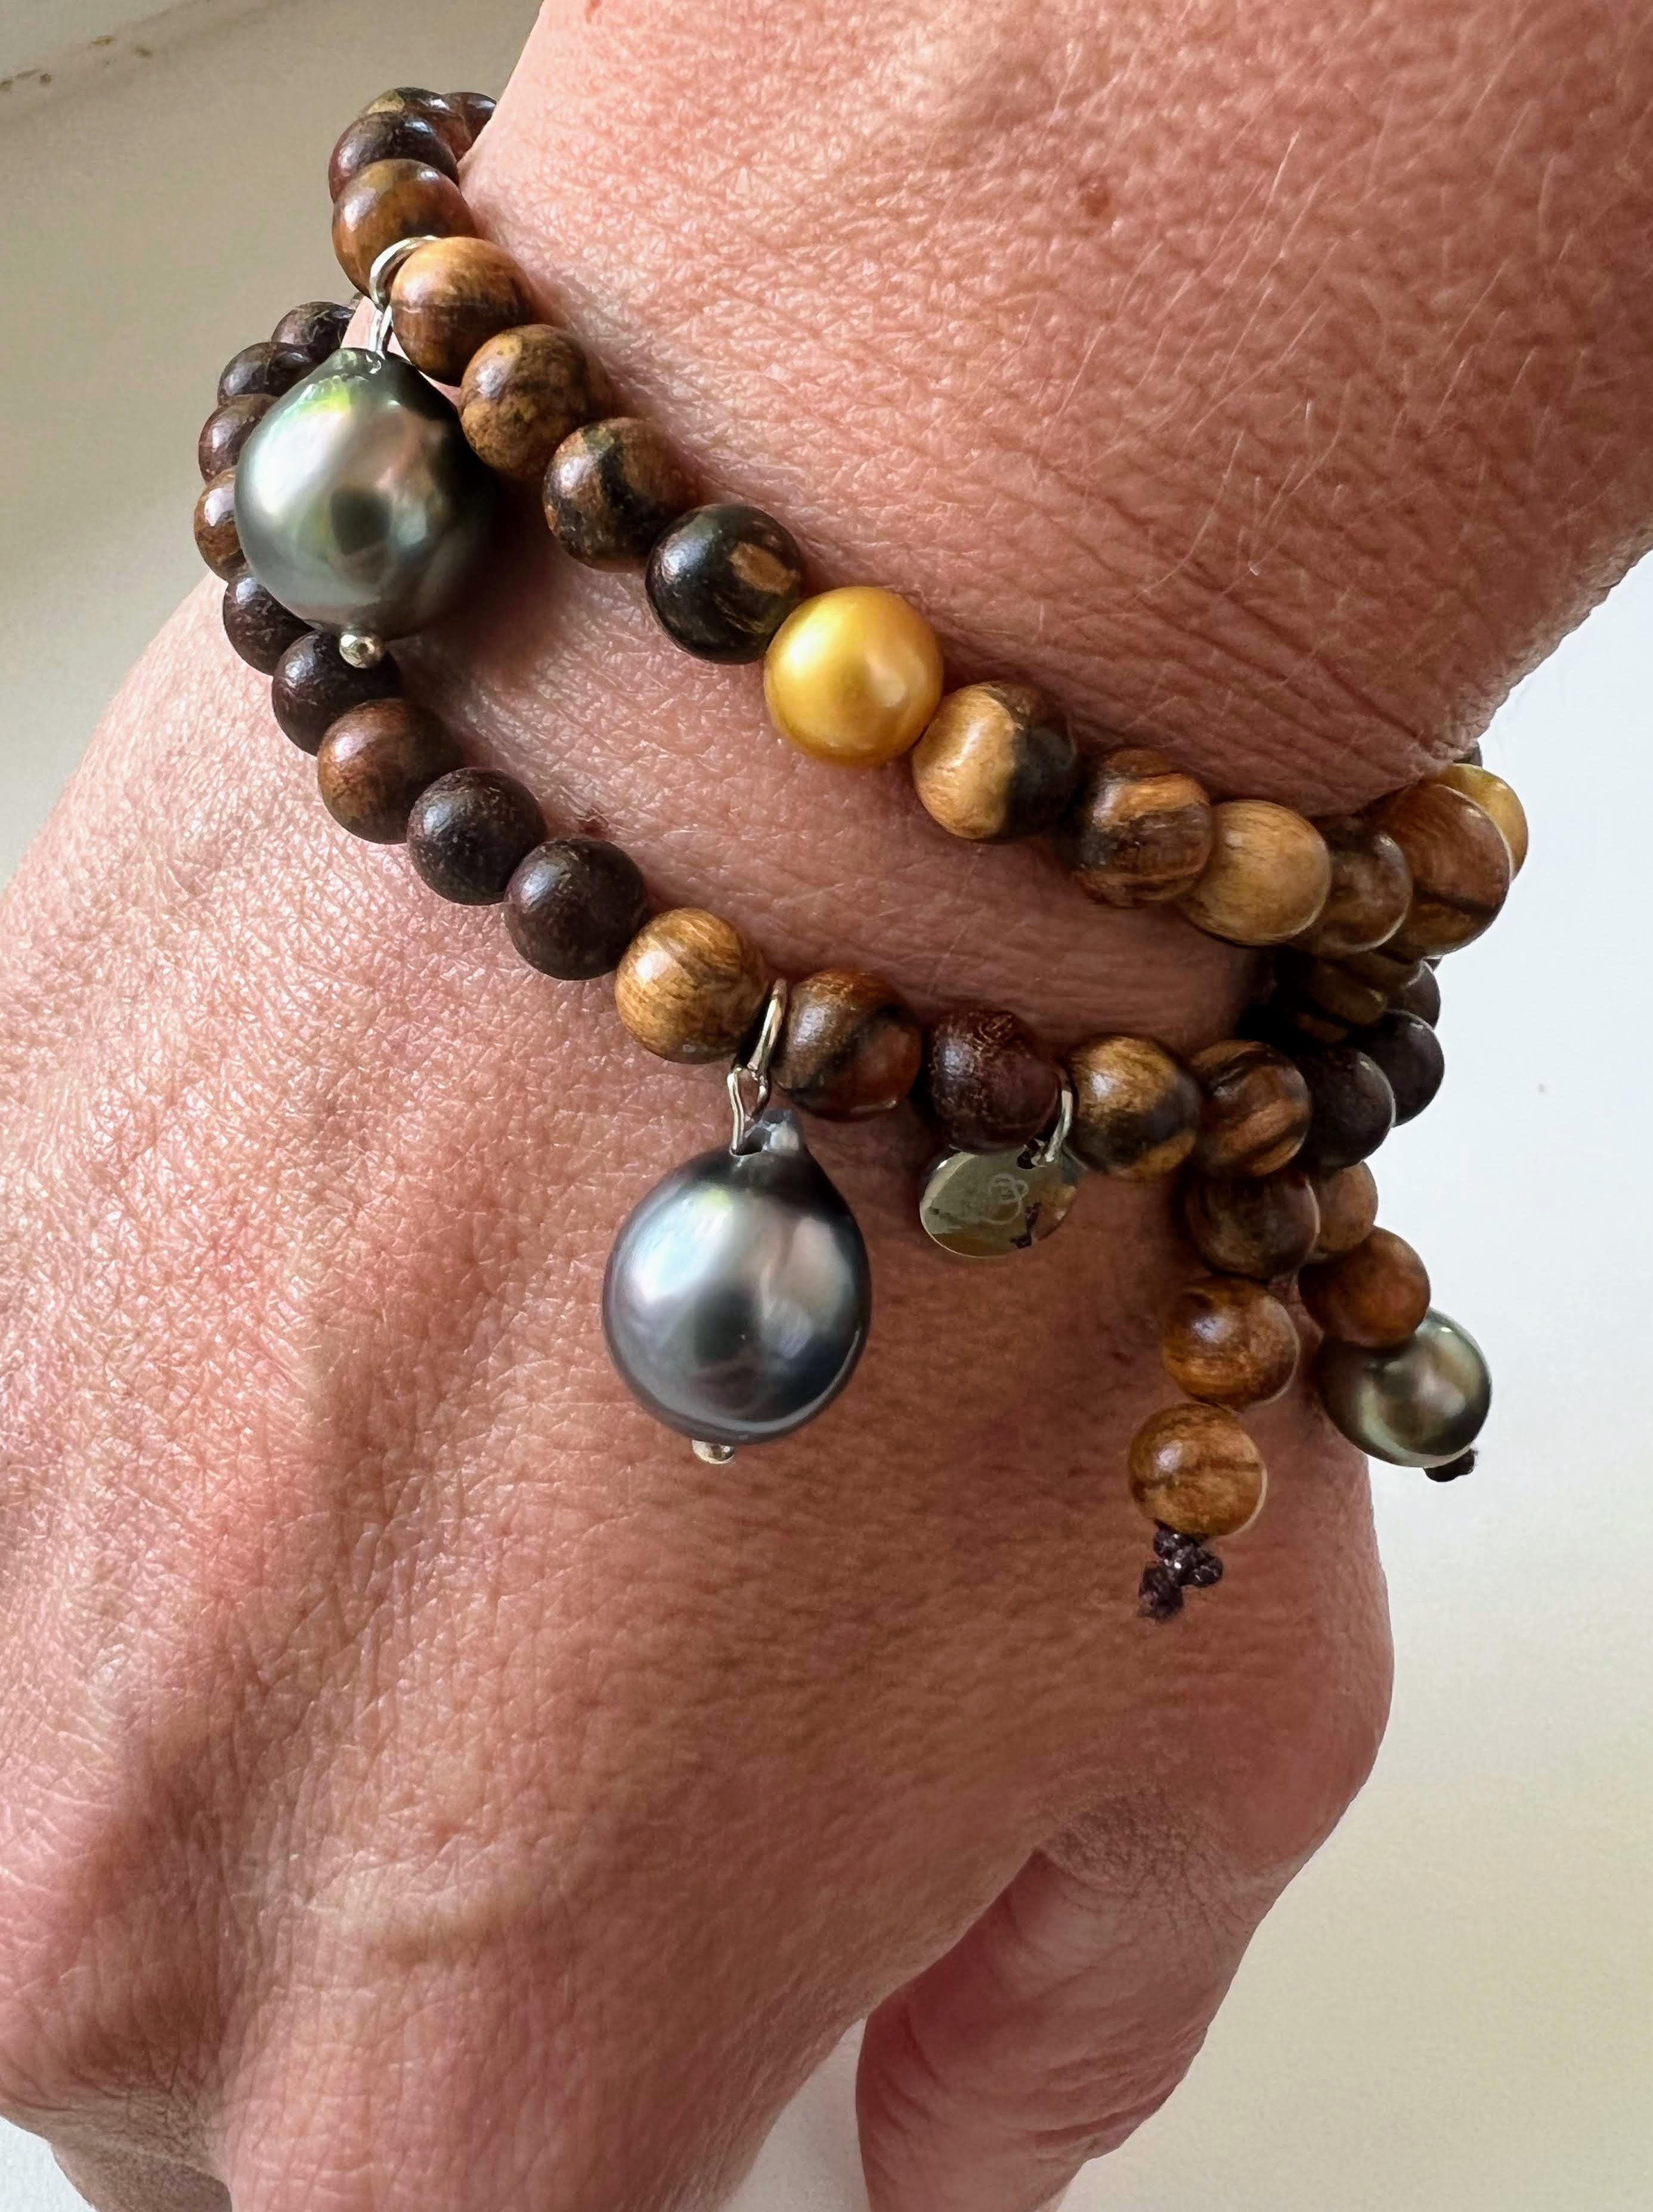 This jewelry piece is inspired by the Buddhist prayer bracelets. It can be worn as a short necklace or wrapped around the wrist. It is captivating with its intriguing little and rare golden pearls. The dangling Tahiti pearls in baroque shape add a